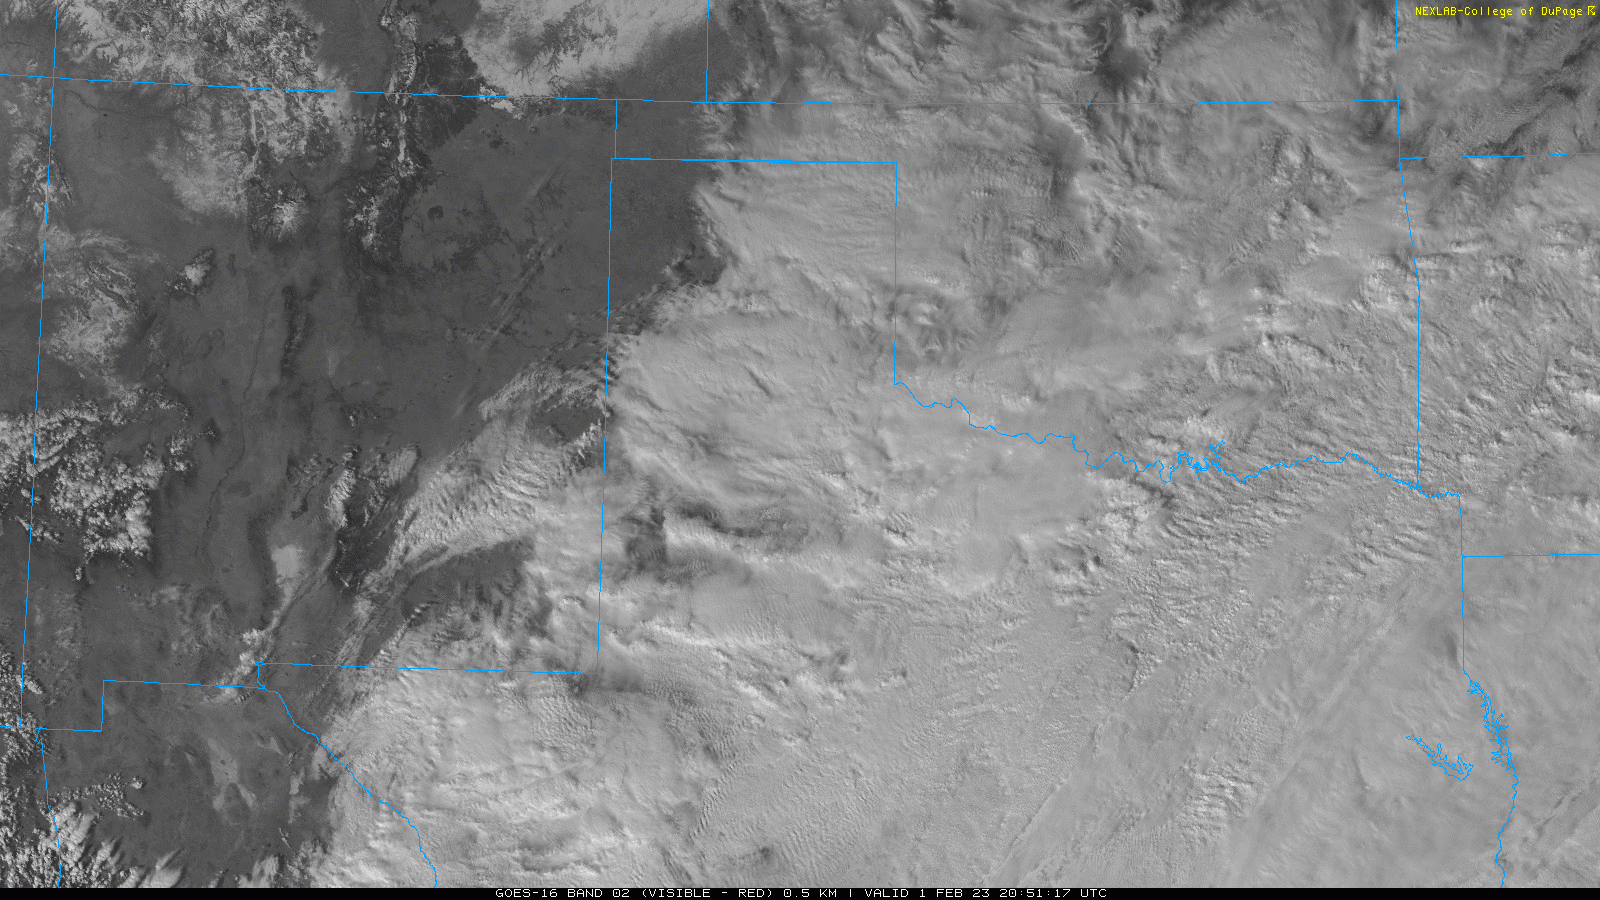 Visible satellite animation valid from 2:51 pm to 3:46 pm on Wednesday (1 February). 